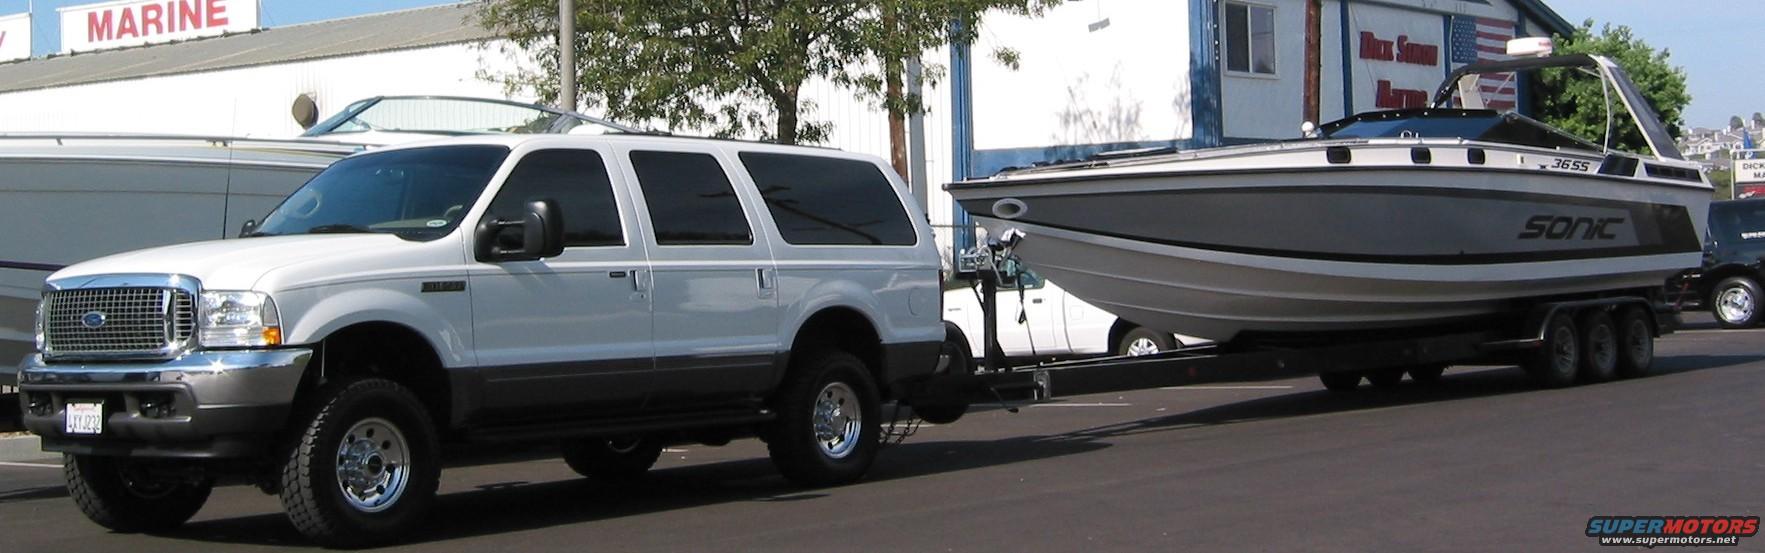 2002 Ford excursion v10 towing capacity